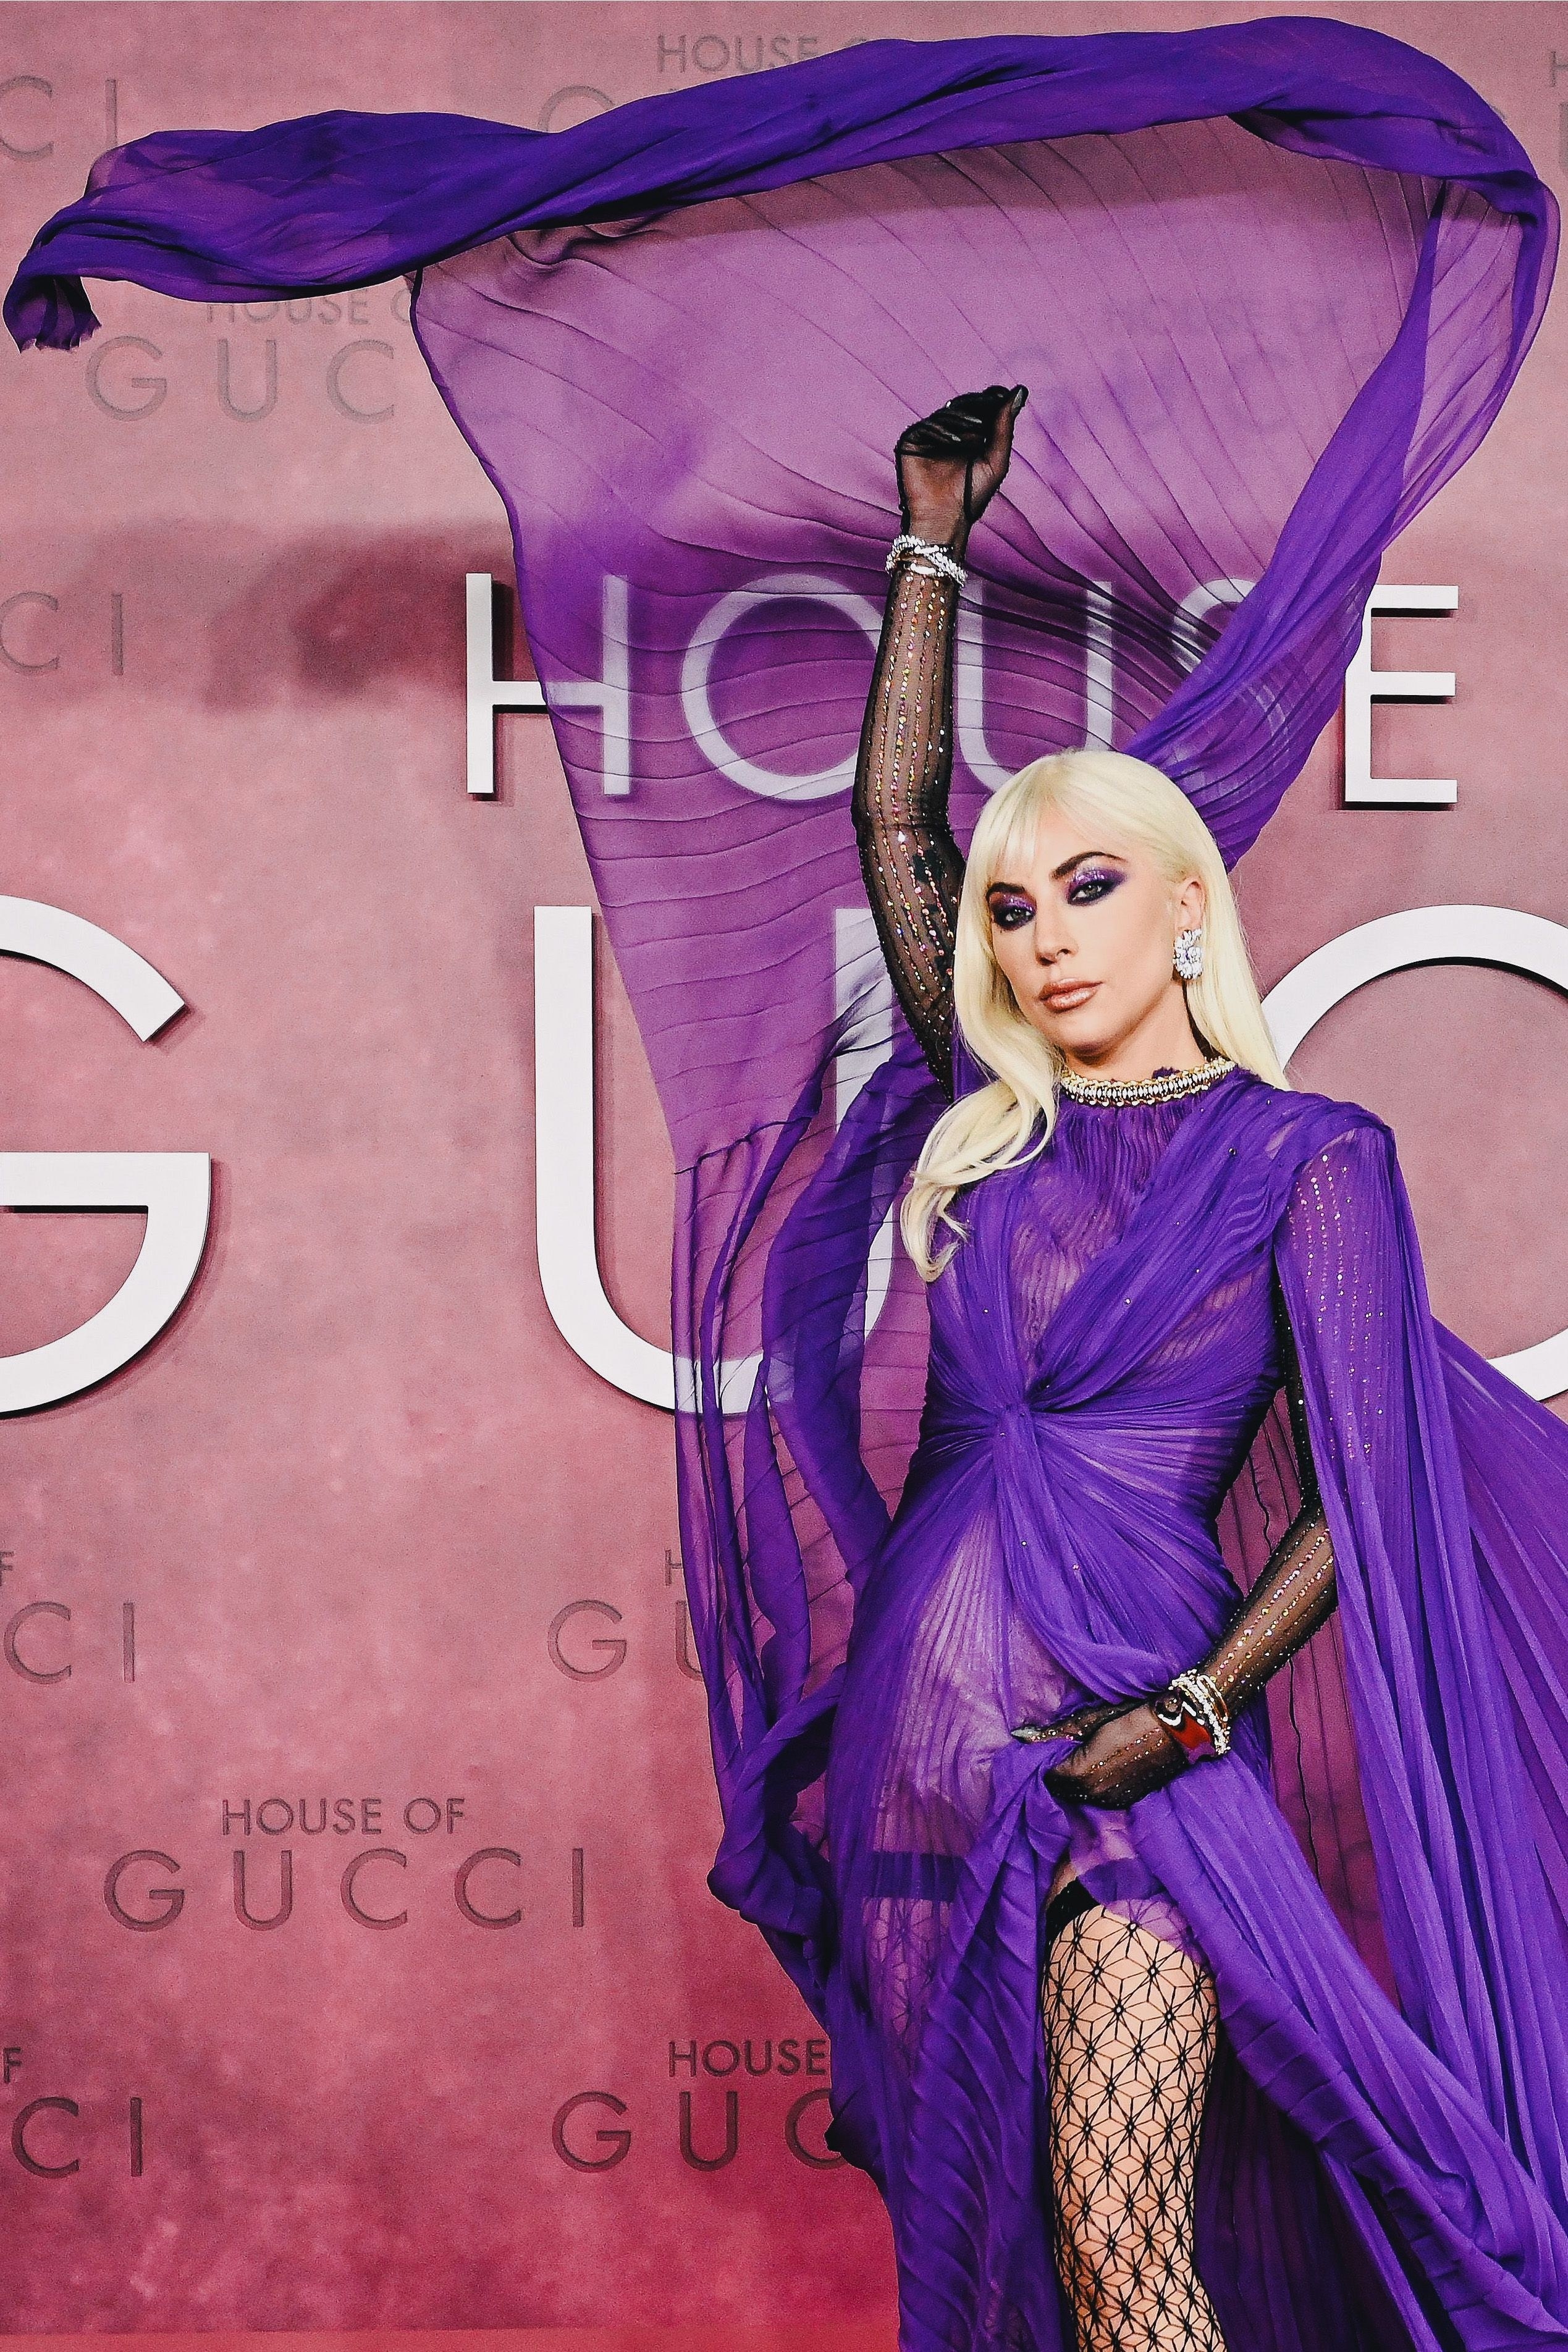 Gaga throwing on side of her gown in front of a House of Gucci logo